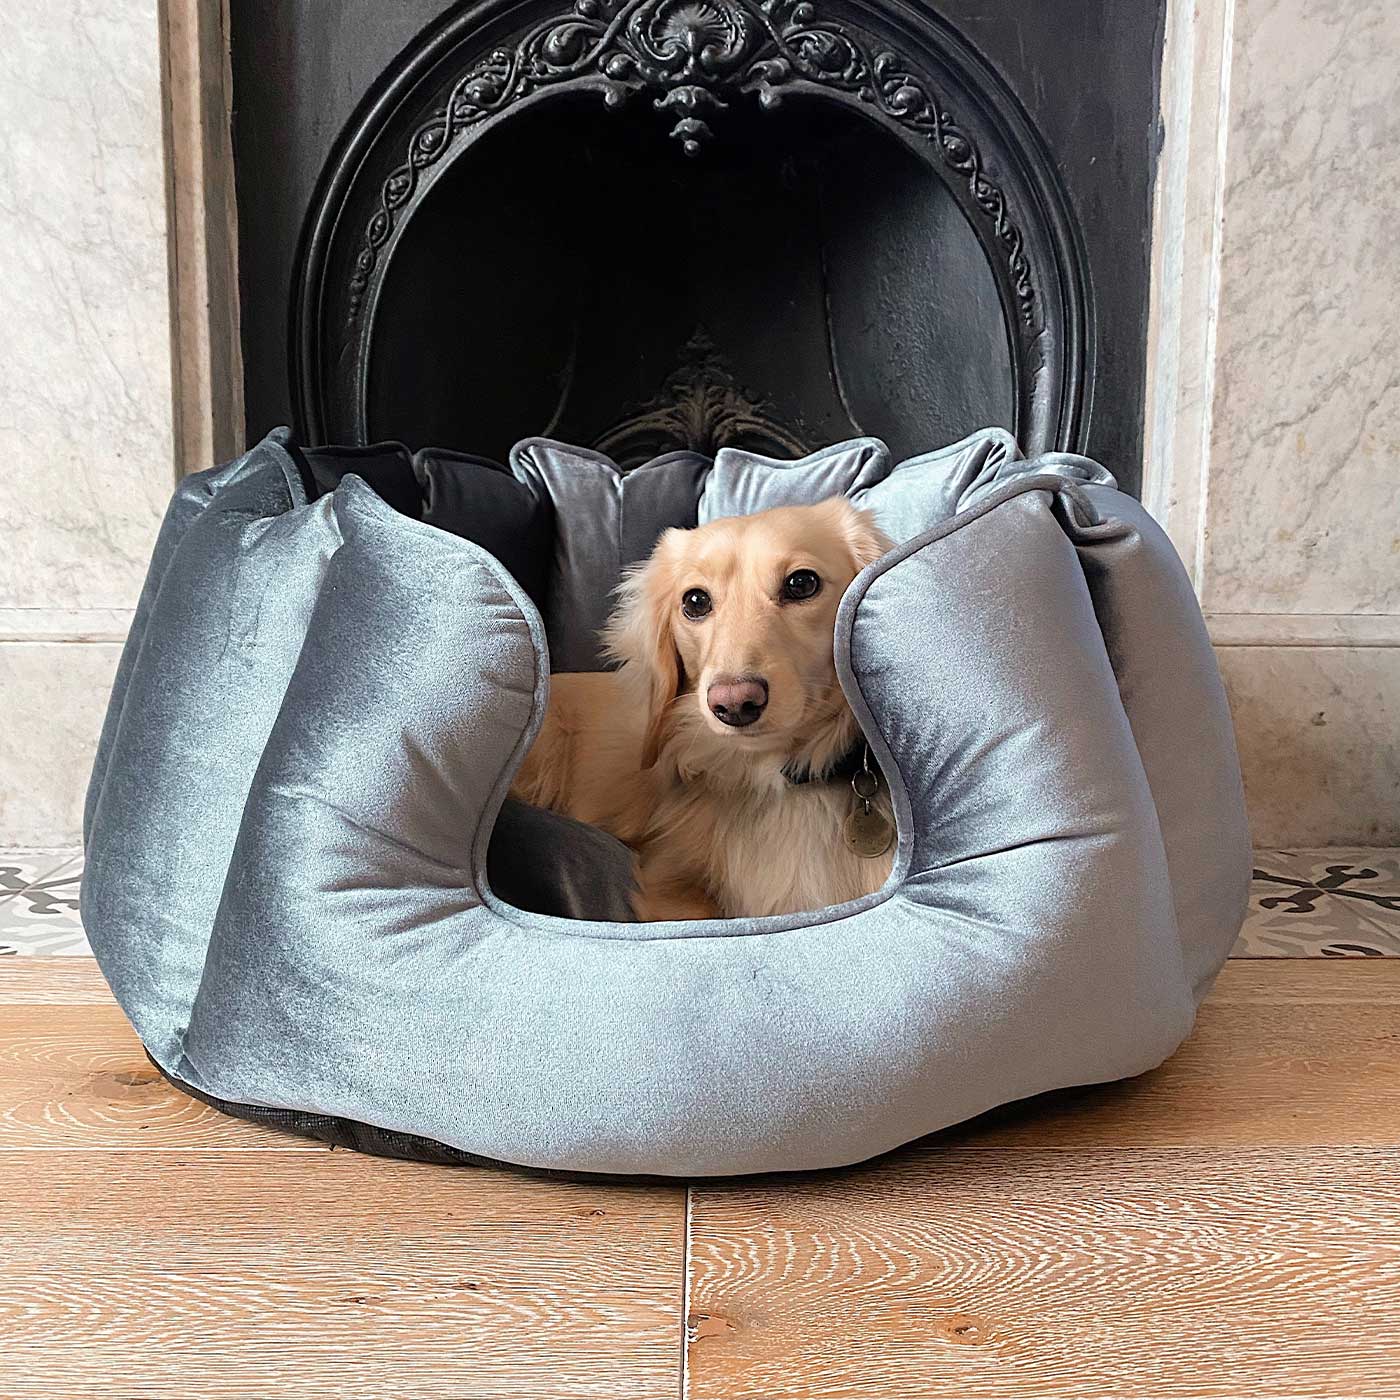 Discover Our Luxurious High Wall Velvet Bed For Dogs, Featuring inner pillow with plush teddy fleece on one side To Craft The Perfect Dogs Bed In Stunning Elephant Velvet! Available To Personalize Now at Lords & Labradors US